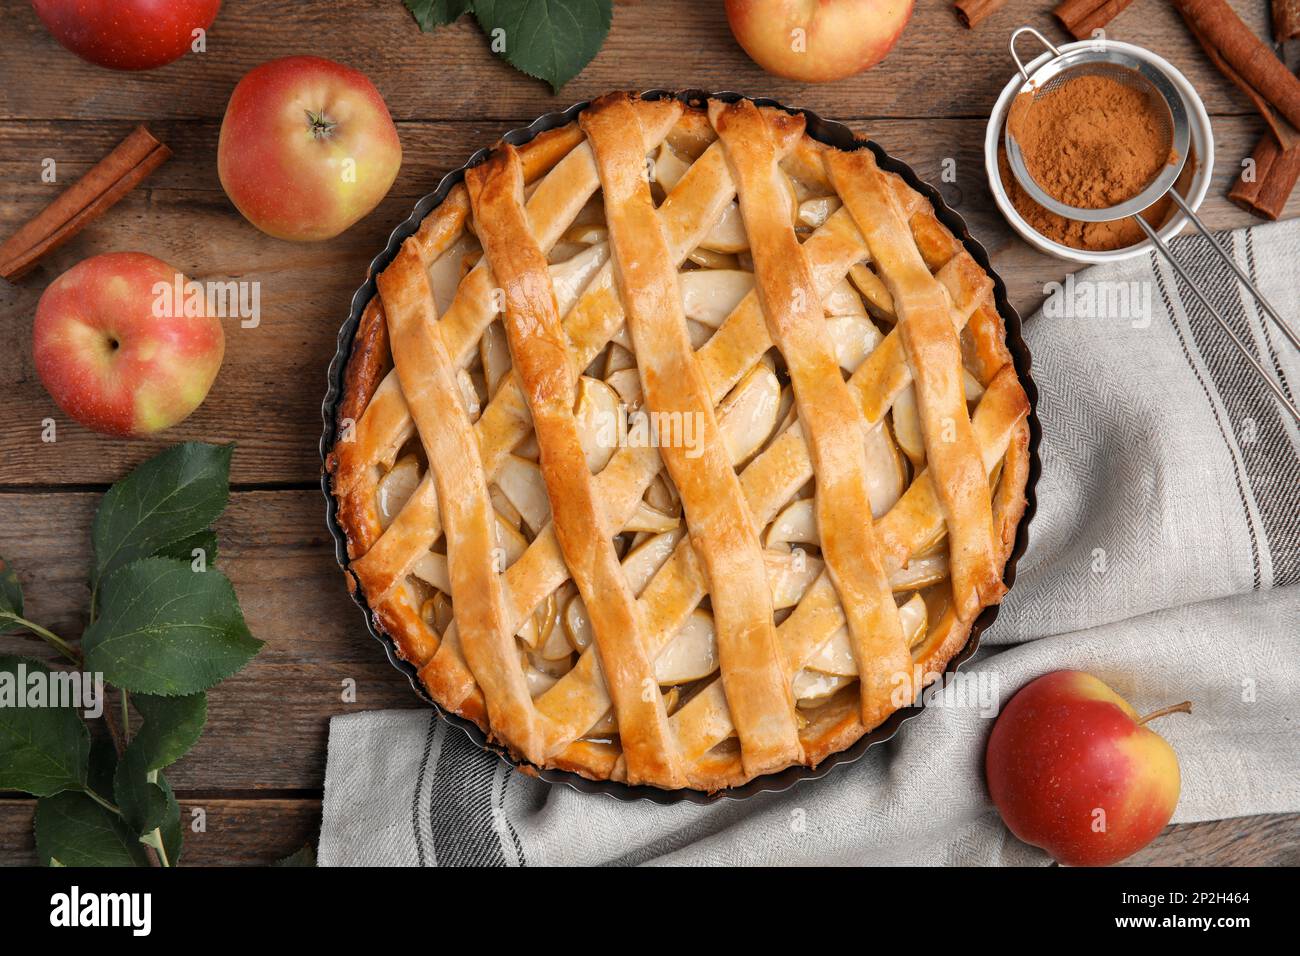 Delicious traditional apple pie on wooden table, flat lay Stock Photo